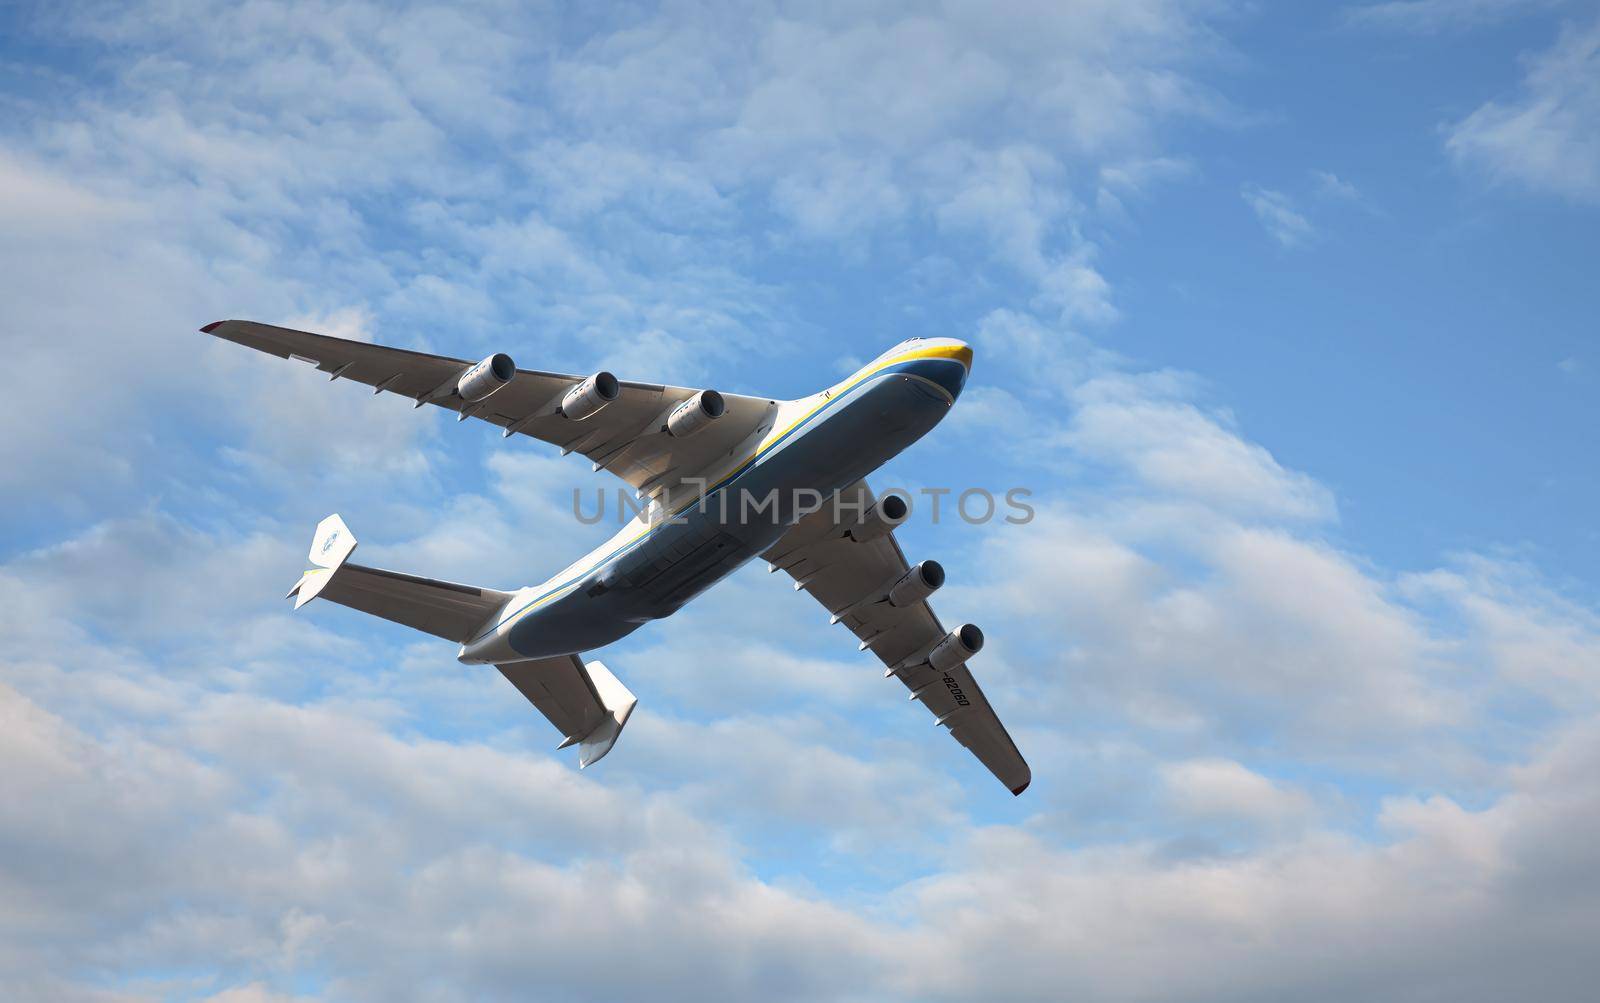 KYIV, UKRAINE - Aug 24, 2021: Celebrating the 30th anniversary of Ukraine independence. The plane Antonov 225 AN-225 Mriya, the biggest airplane in the world in the sky over Kyiv during the parade